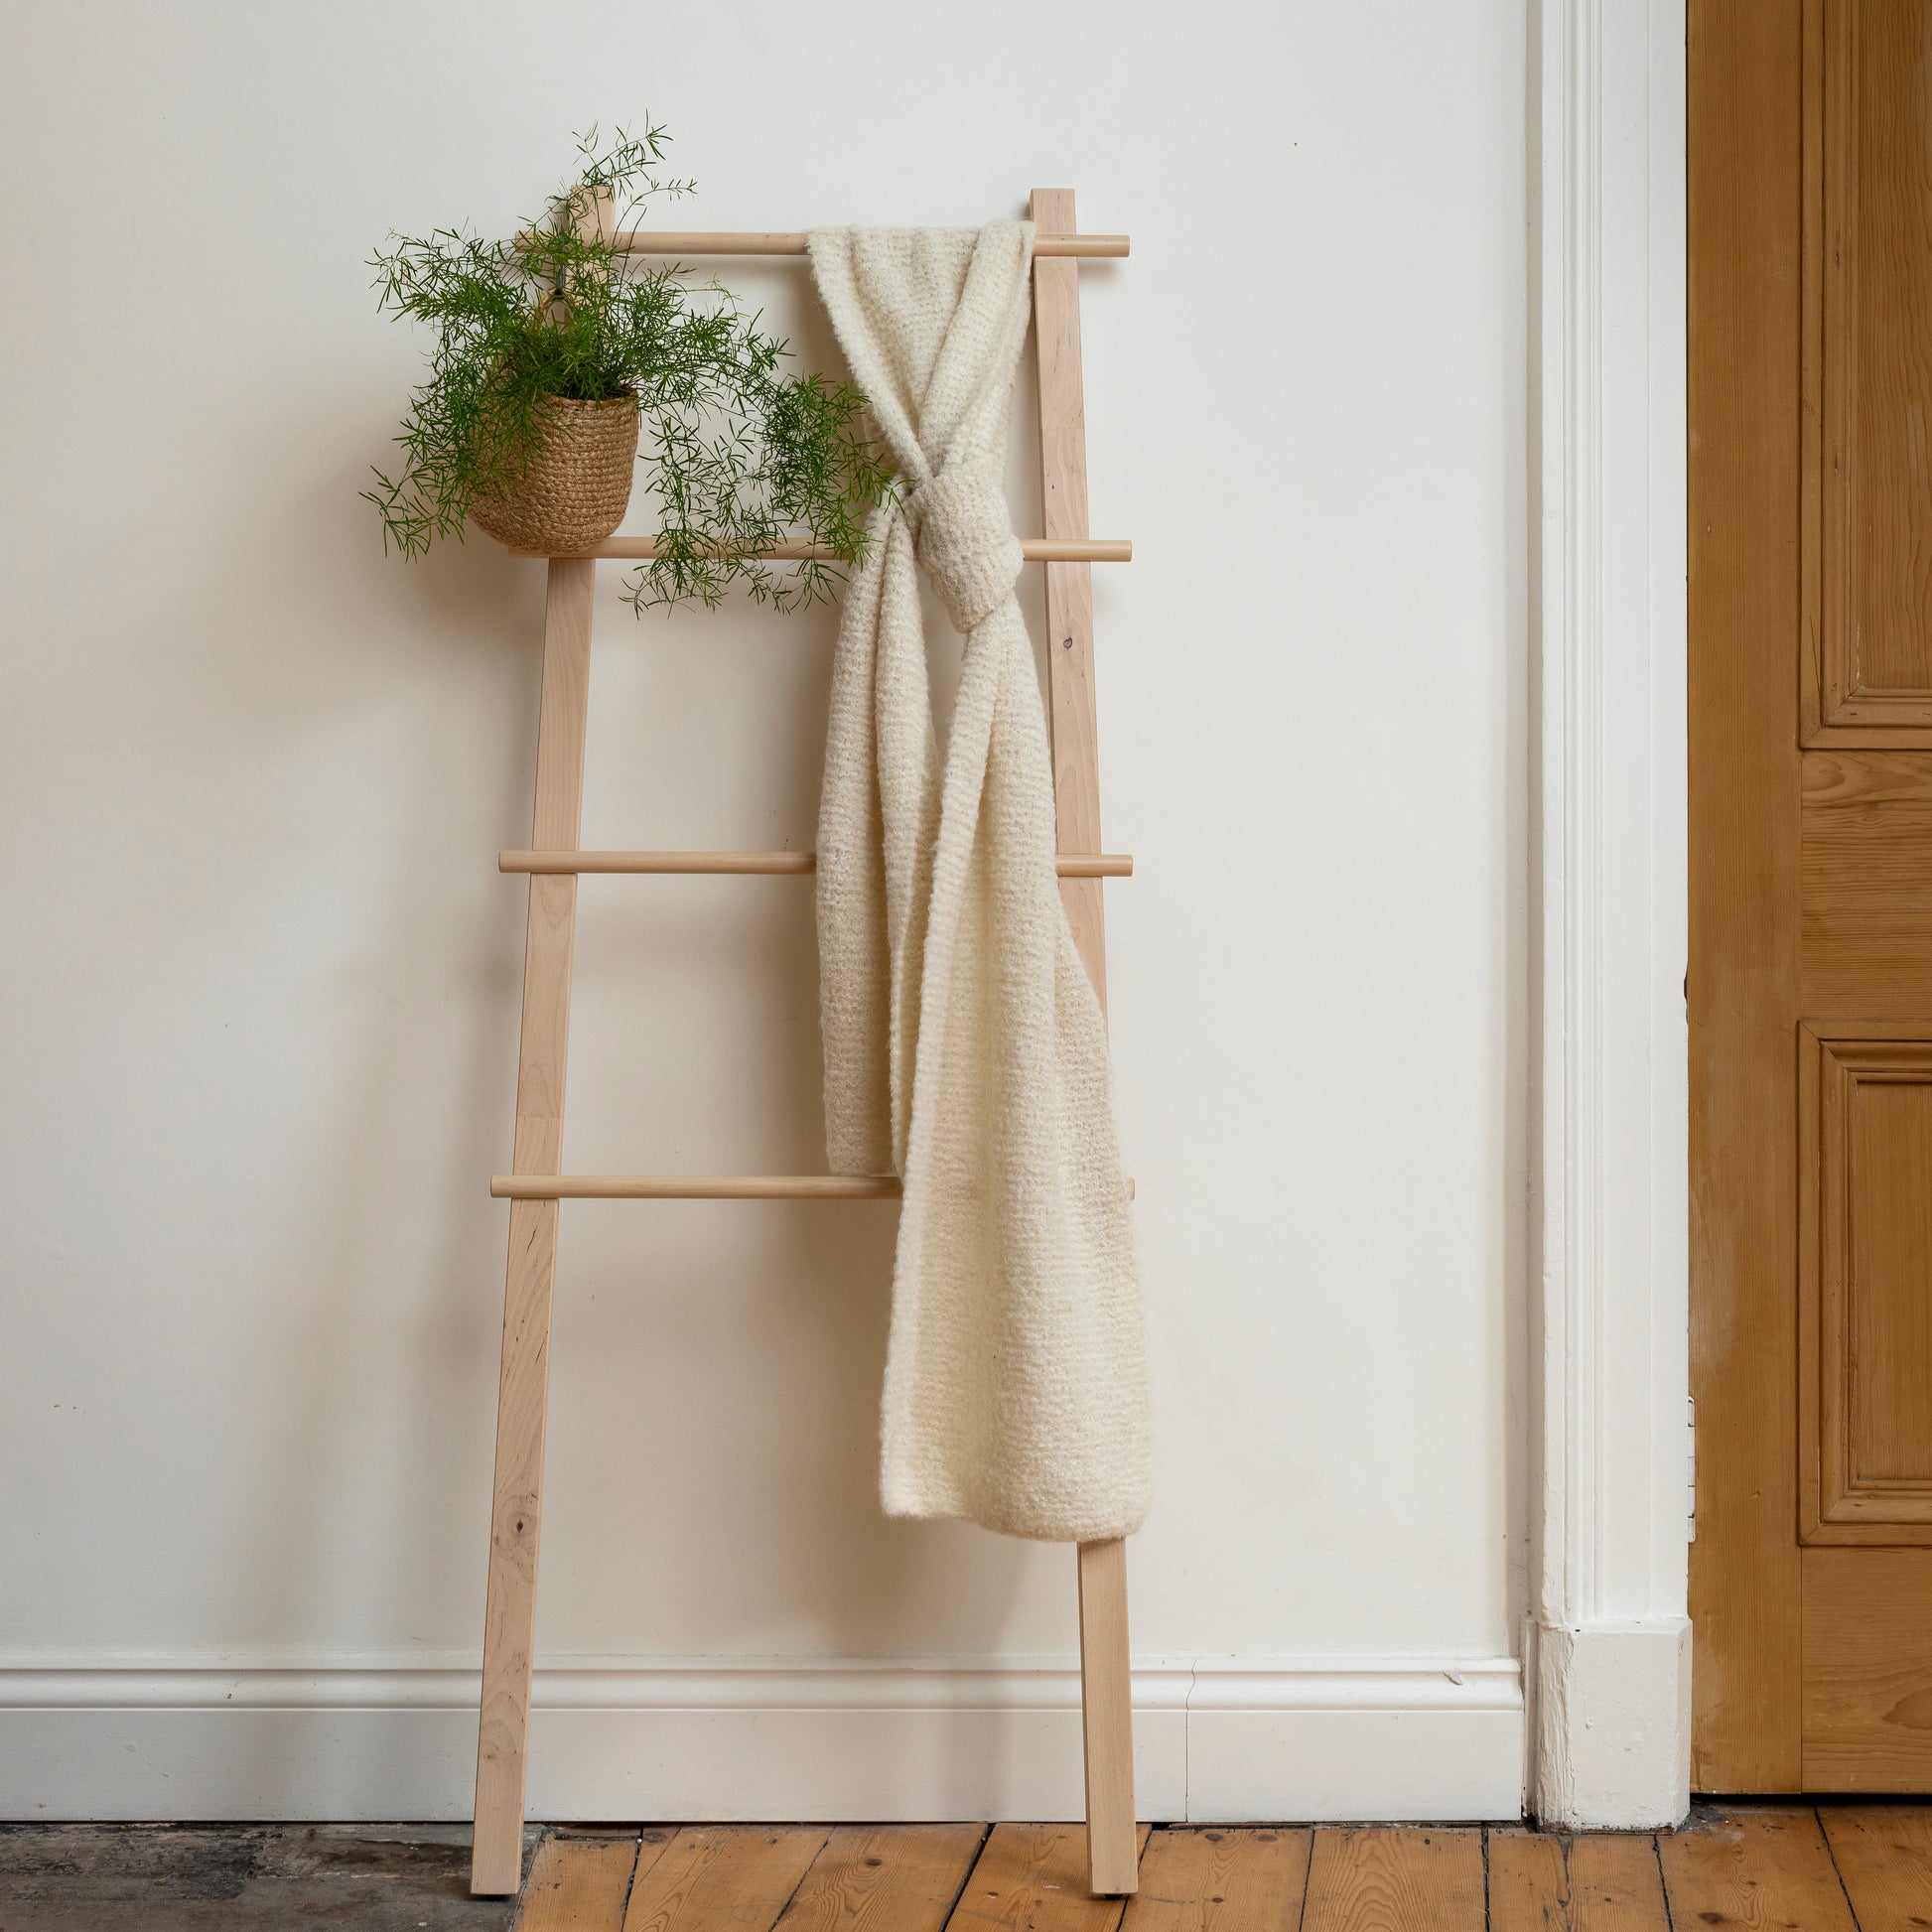 Beautiful, one of a kind white hand-knitted scarf displayed on wooden ladder